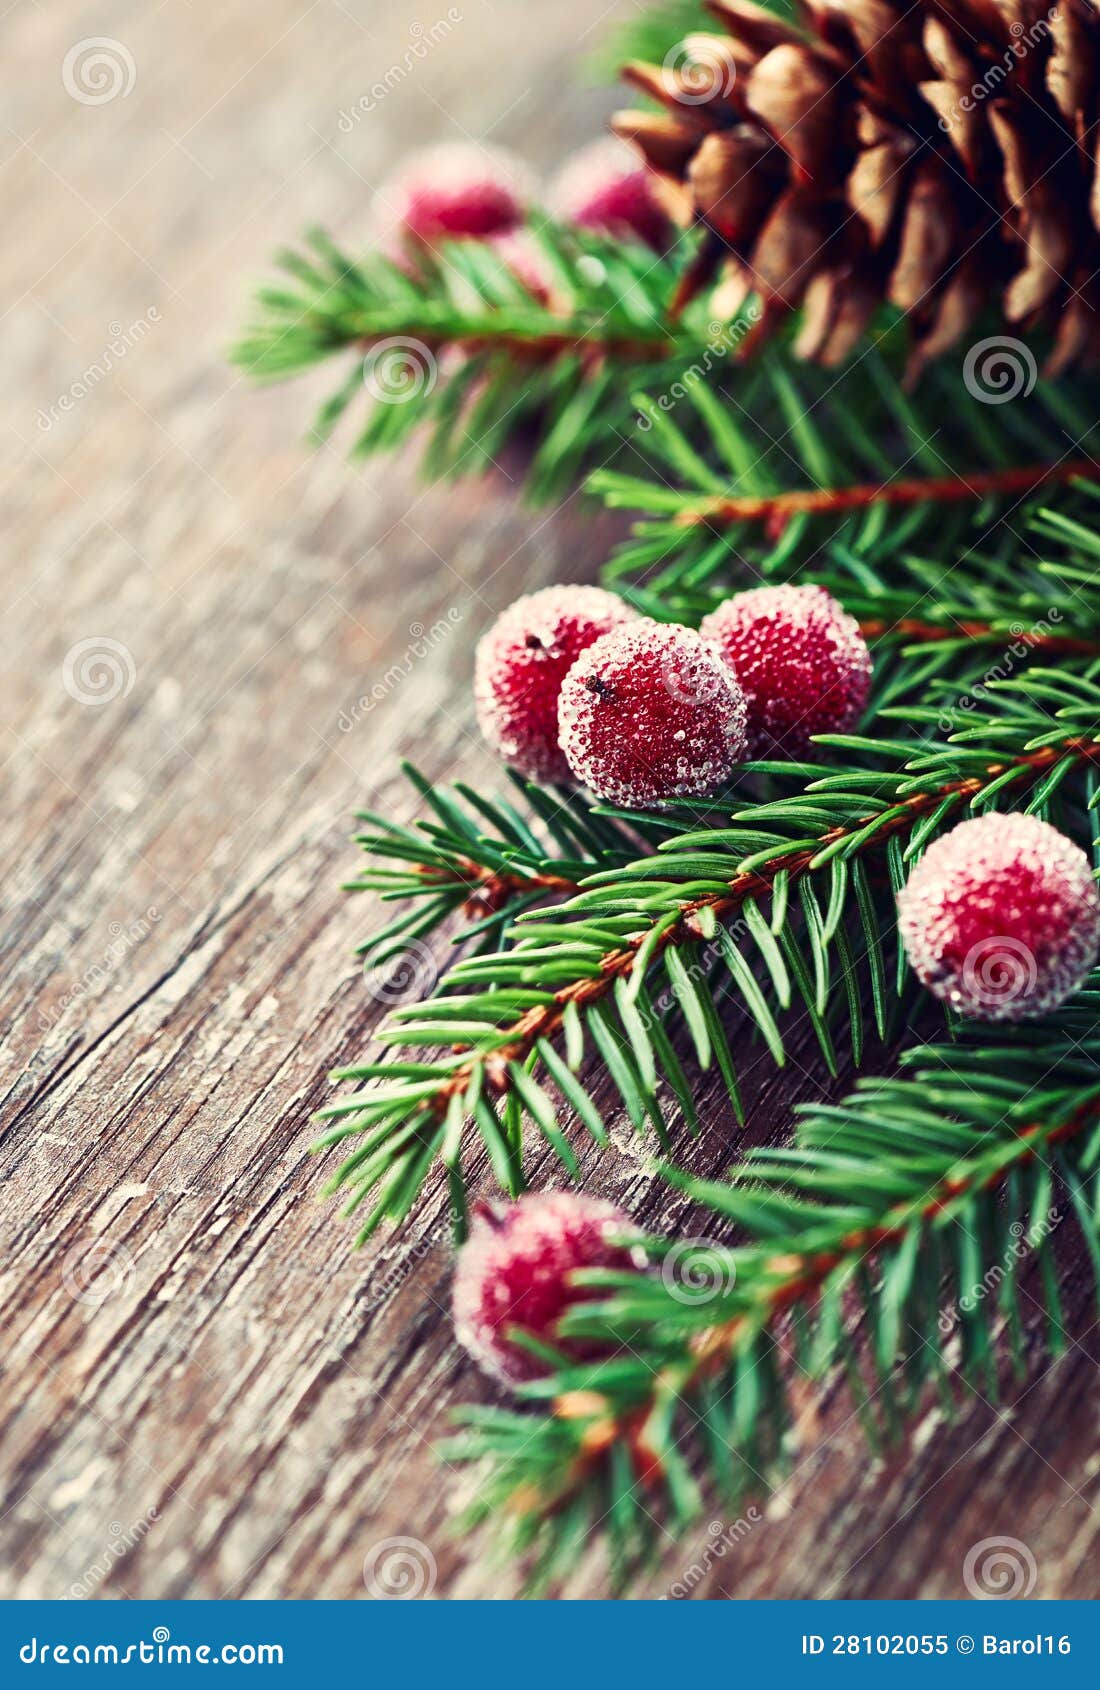 Rustic Christmas Decoration Royalty Free Stock Photo 